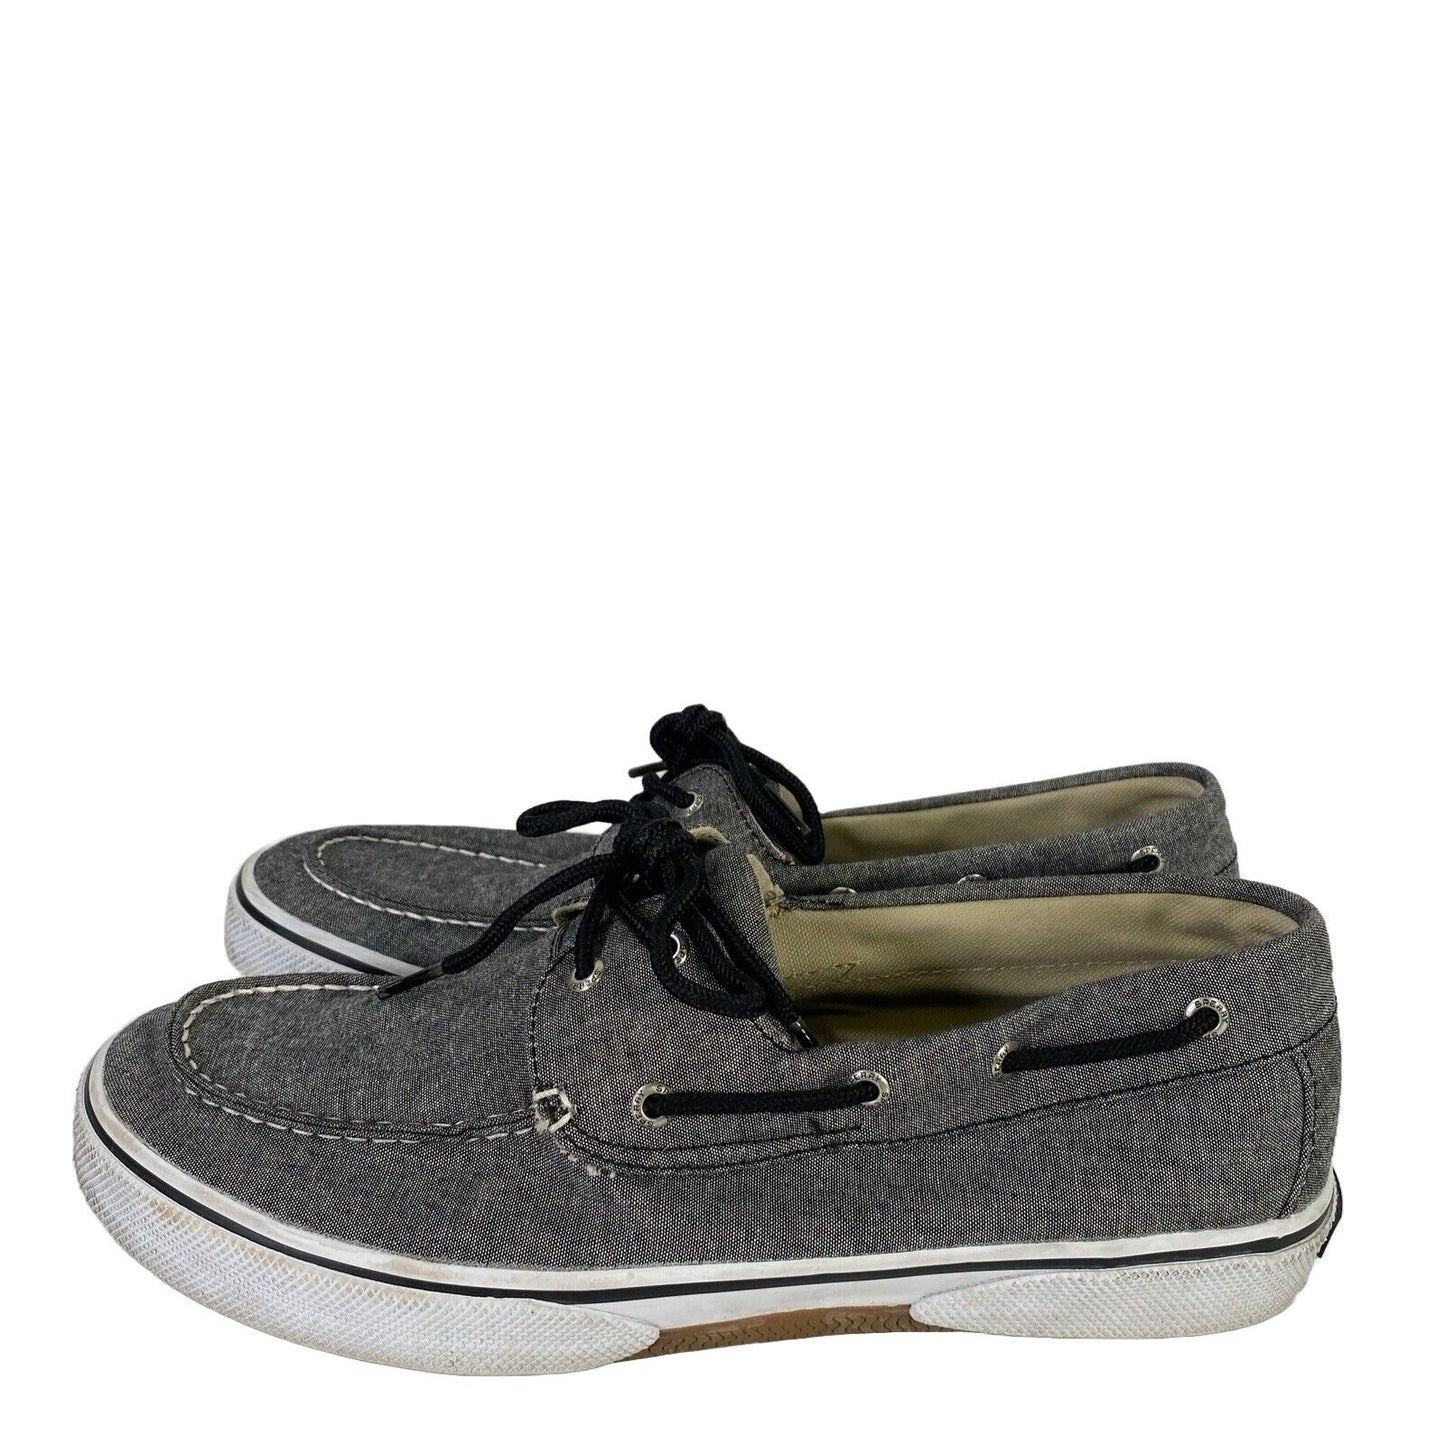 Sperry Men's Gray/Black Canvas Boat Shoes - 11